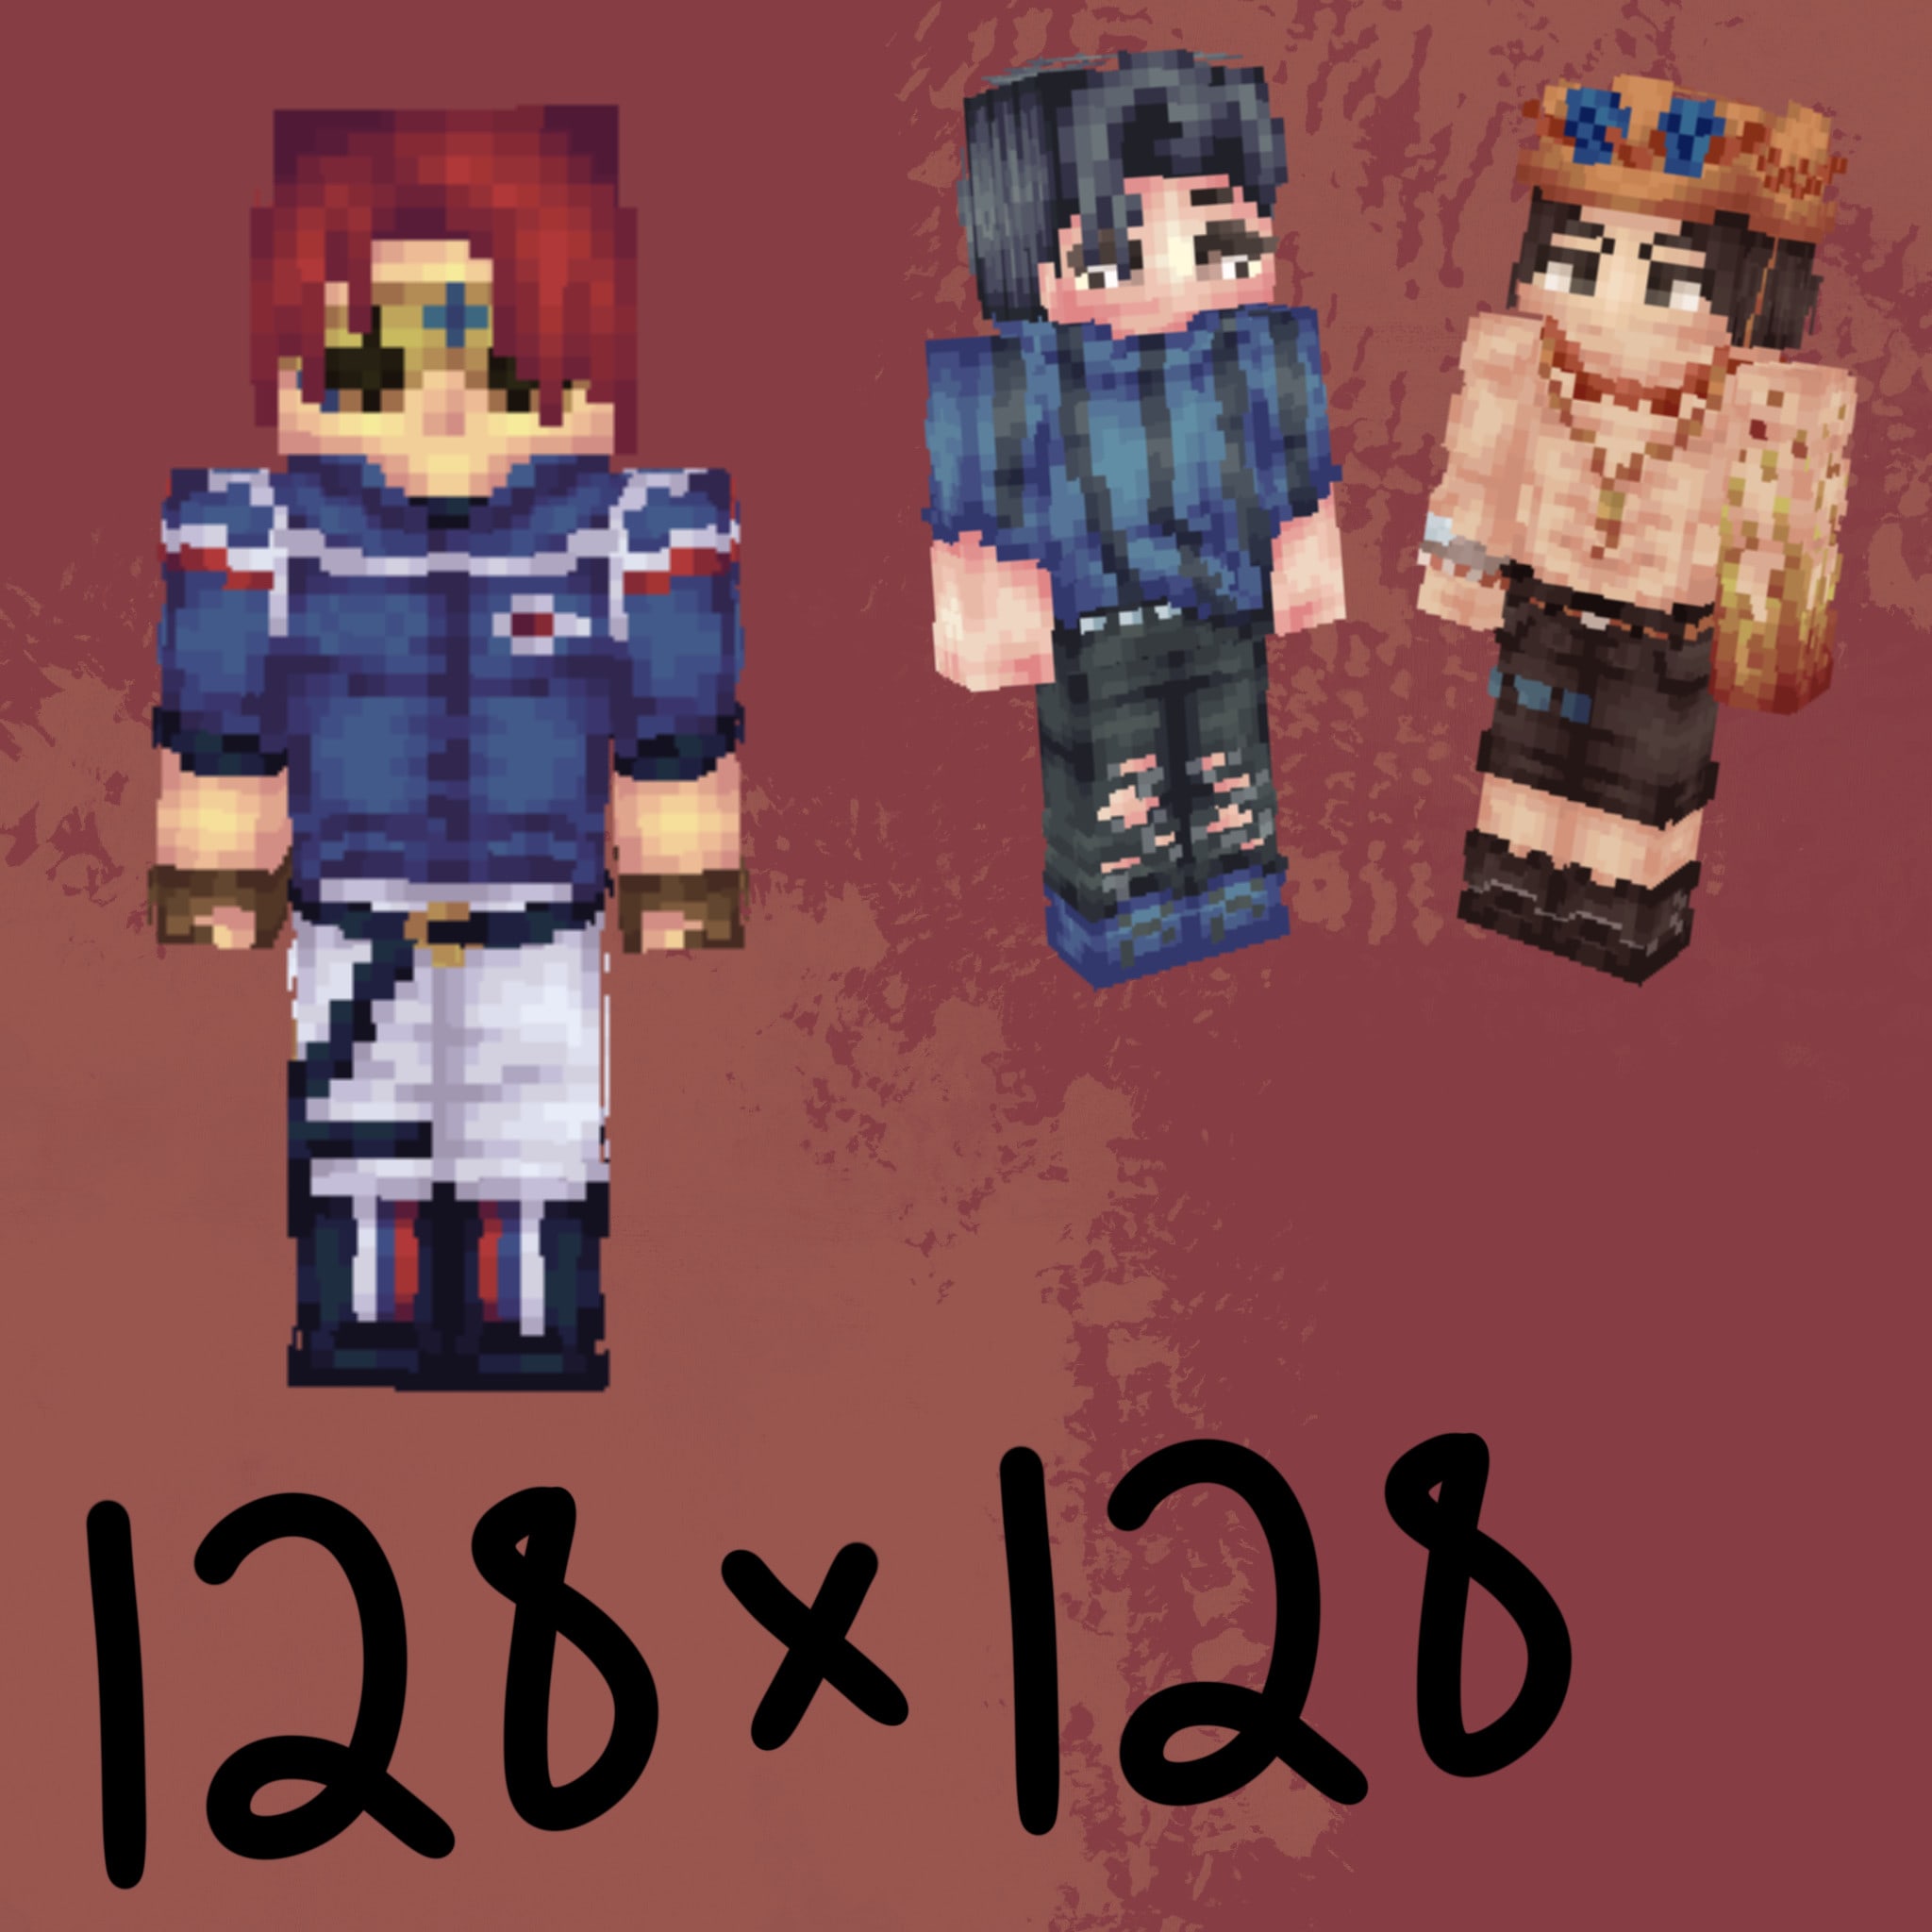 Soup on X: I tried making a 128 x 128 Minecraft skin, and I gotta say, I  am honestly proud how this came out.  #Minecraft  #minecraftskin #IronMaiden #IronMaidenEddie #EddieTheHead #LegacyOfTheBeast  I